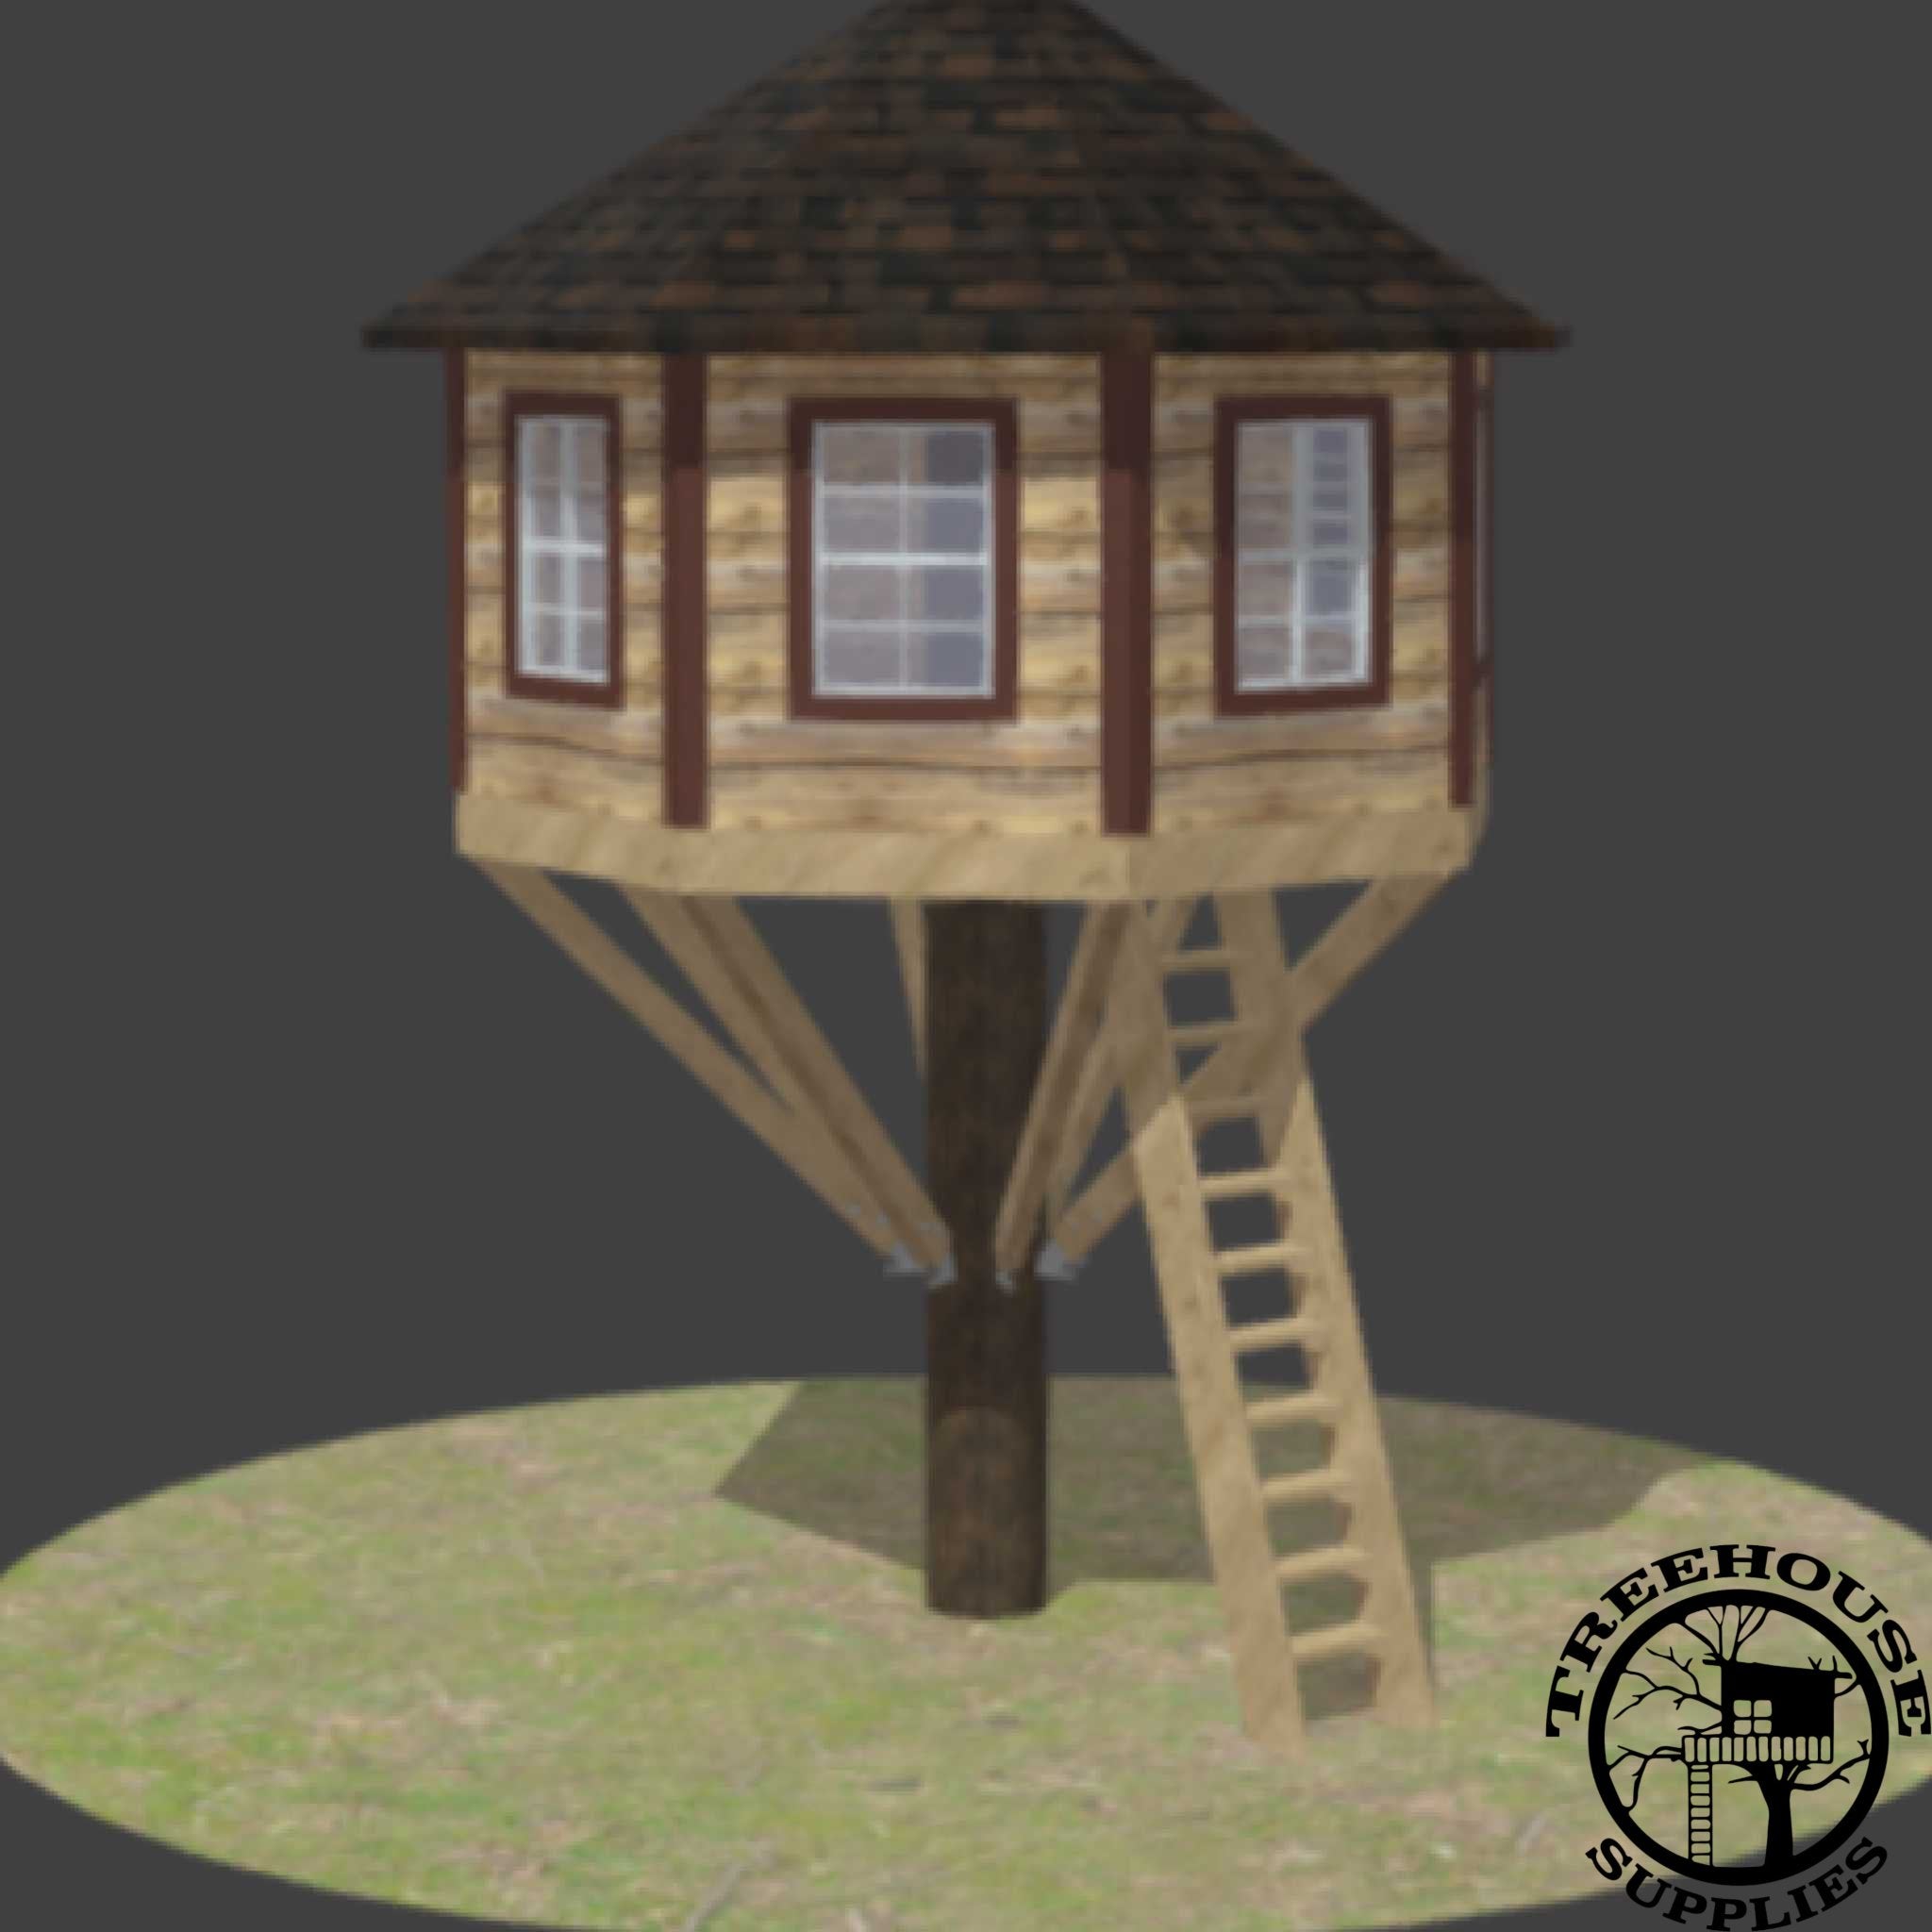 8' DIAMETER OCTAGONAL TREEHOUSE PLAN - NOW INCLUDES STEP-BY-STEP 3D MODELING!! - Treehouse Supplies